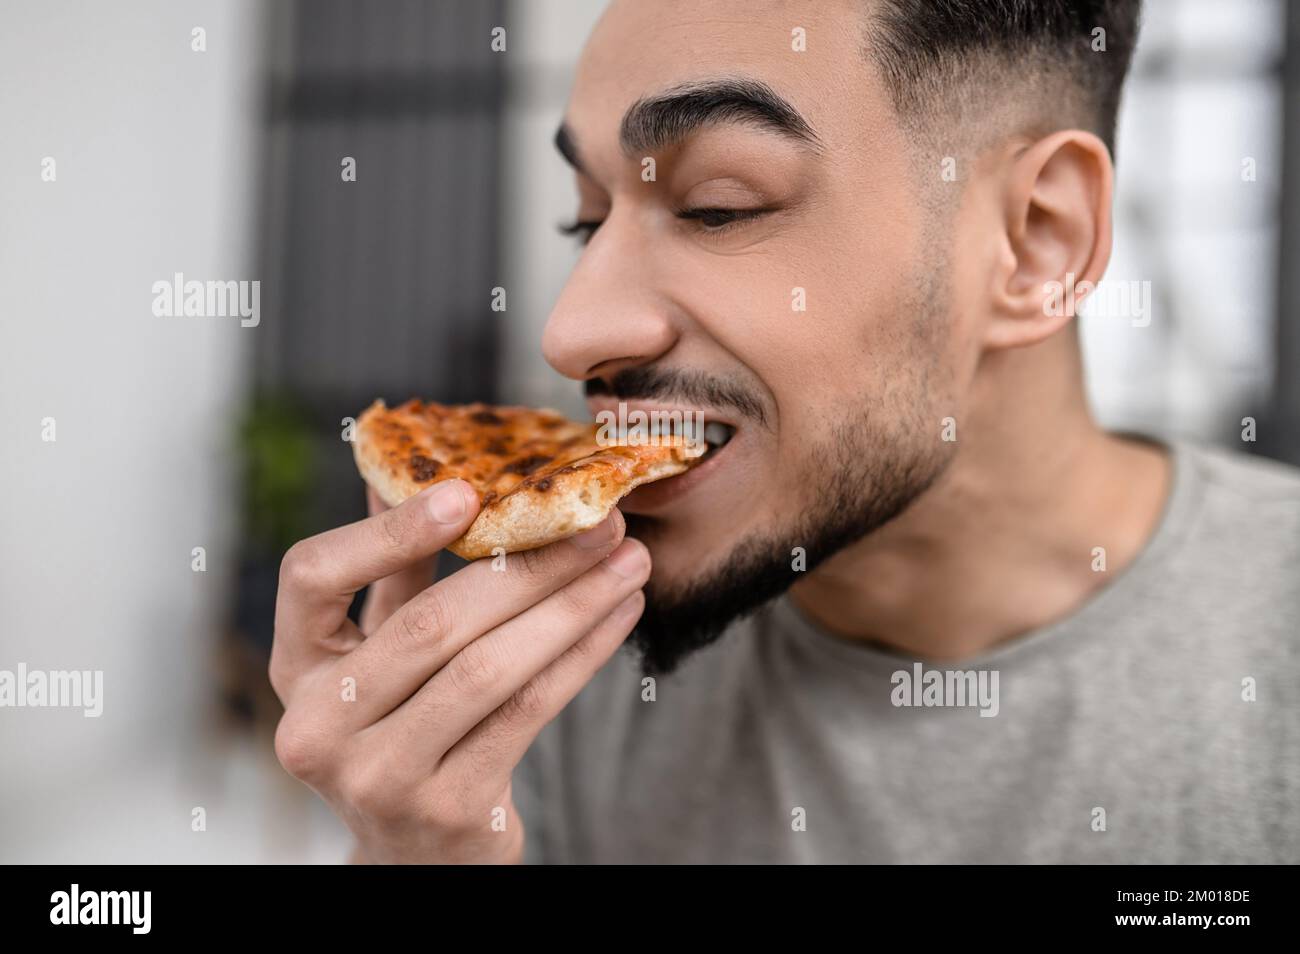 Tasty food. Face of young bearded man sideways to camera biting off delicious fresh pizza indoors. Stock Photo